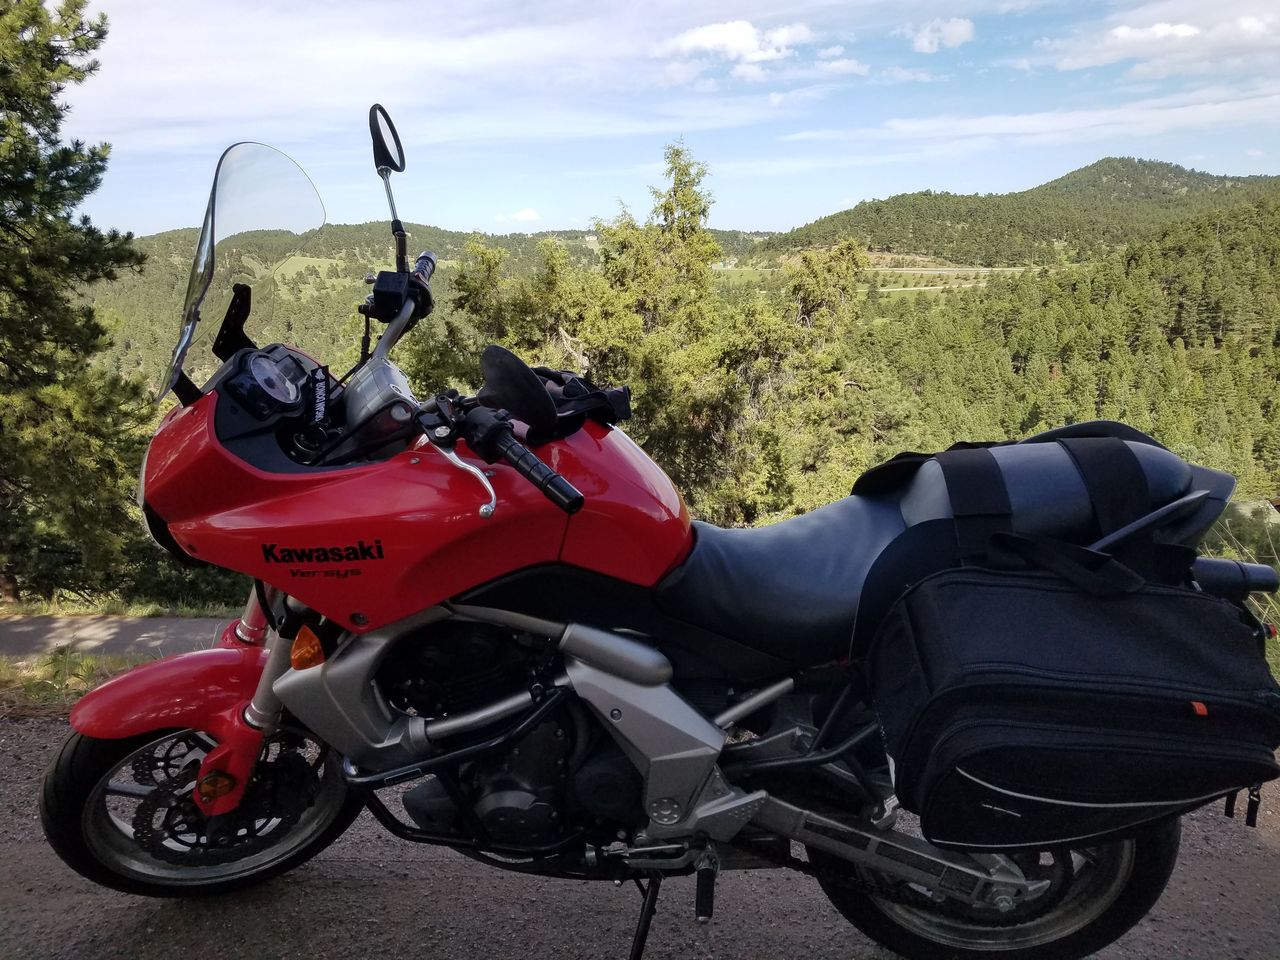 I rode in to the mountains to get a pretty picture before posting